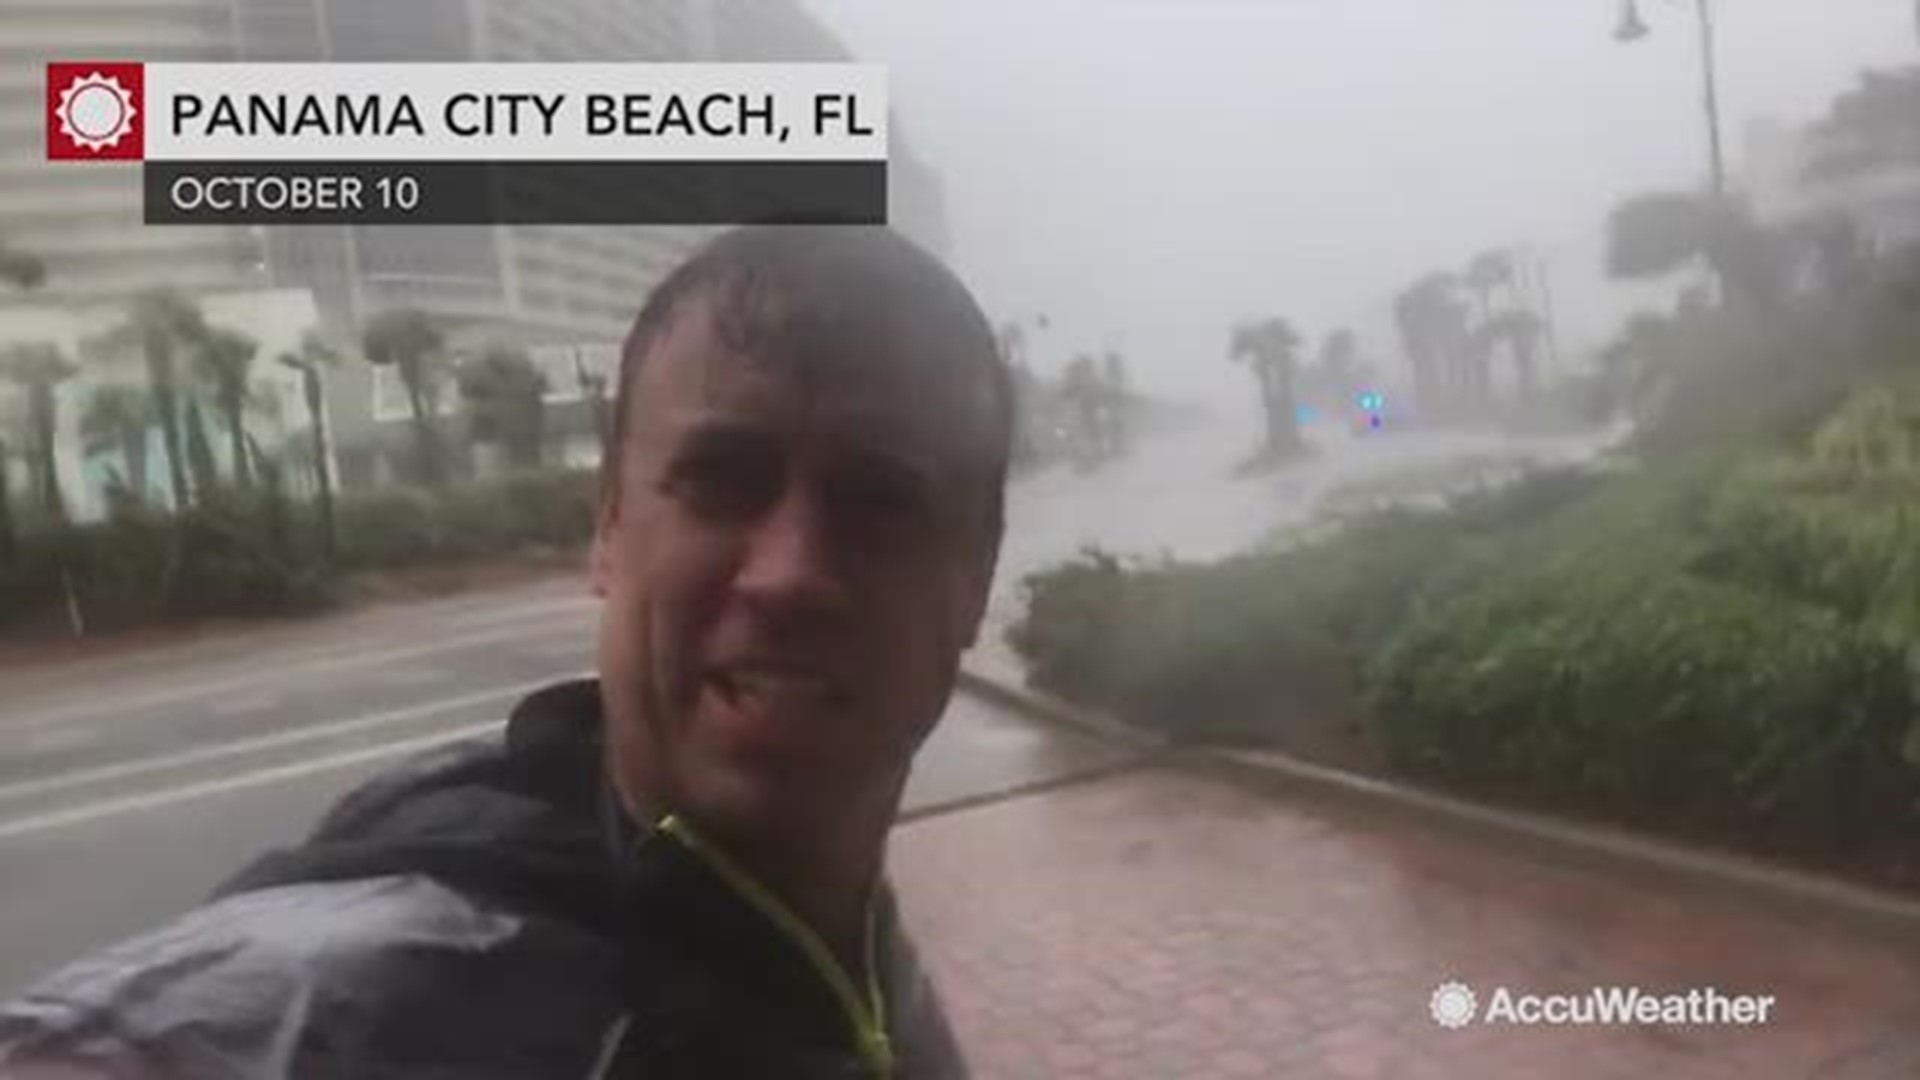 Storm chaser Reed Timmer is in Panama City Beach, Florida where winds from Hurricane Michael are so loud and ferocious that it's hard to hear him speak.